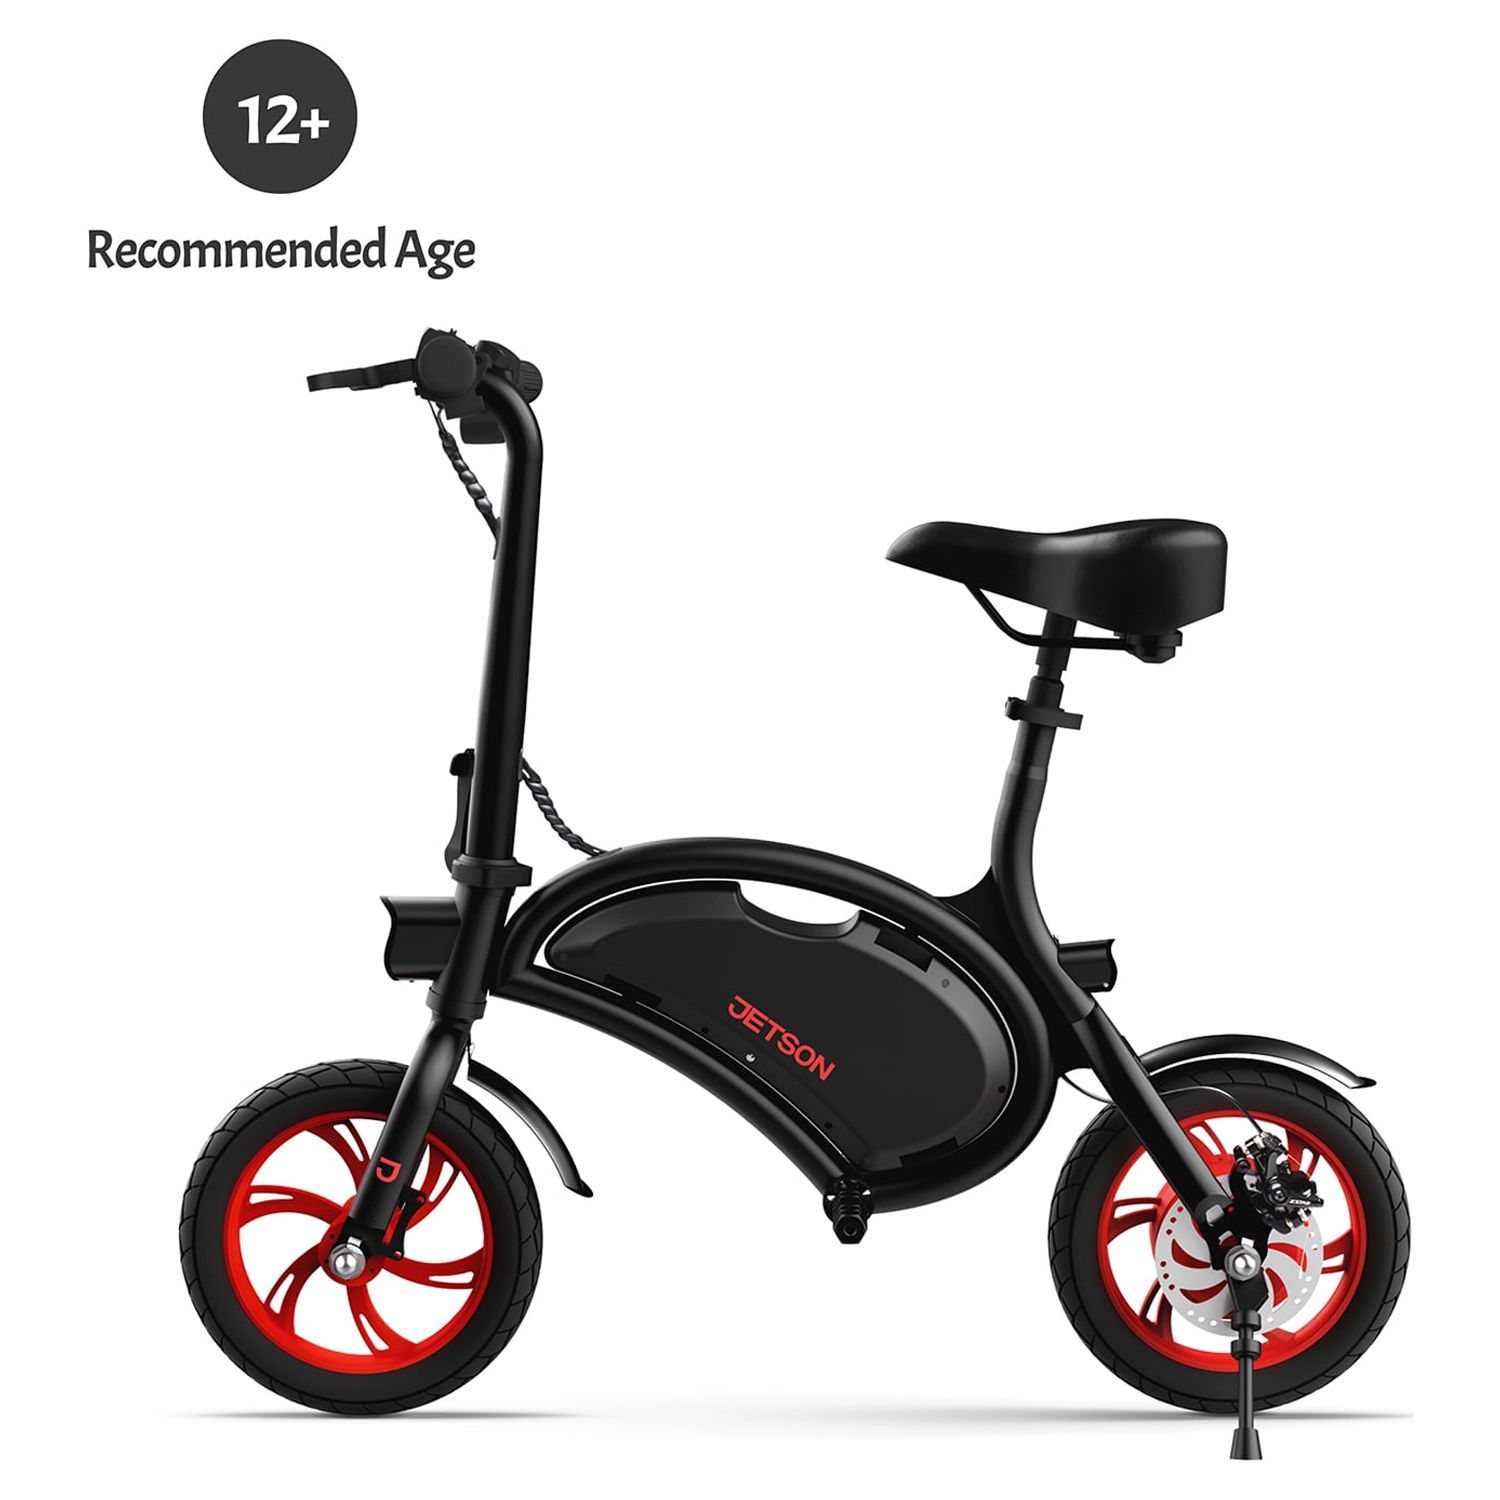 Jetson Bolt Folding Electric Ride-On with Twist Throttle, Cruise Control, Up to 15.5 mph, Black - image 10 of 17